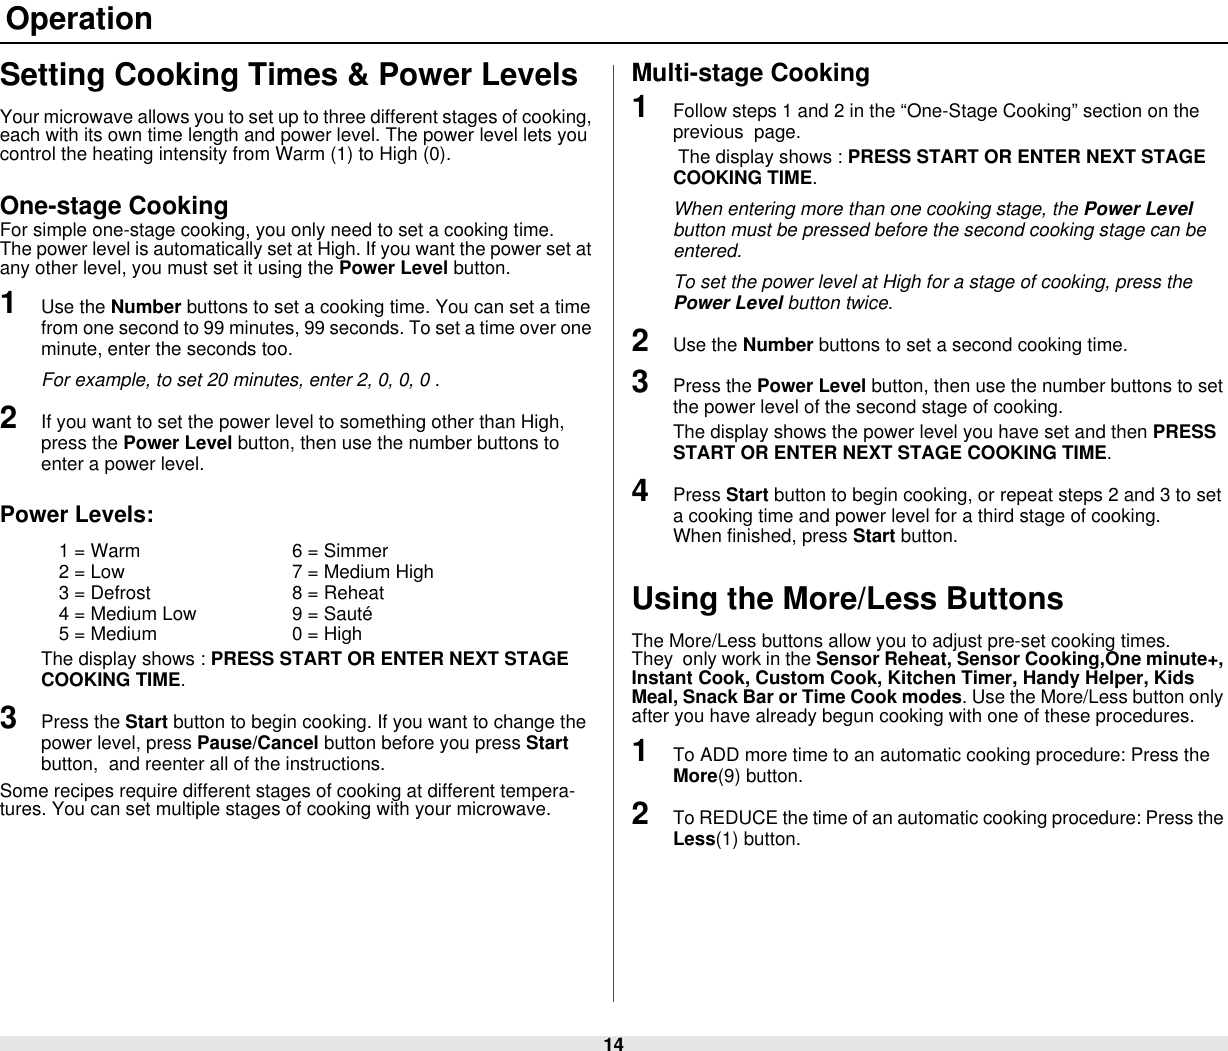 14 OperationSetting Cooking Times &amp; Power LevelsYour microwave allows you to set up to three different stages of cooking, each with its own time length and power level. The power level lets you control the heating intensity from Warm (1) to High (0).One-stage CookingFor simple one-stage cooking, you only need to set a cooking time.    The power level is automatically set at High. If you want the power set at any other level, you must set it using the Power Level button.1Use the Number buttons to set a cooking time. You can set a time from one second to 99 minutes, 99 seconds. To set a time over one minute, enter the seconds too. For example, to set 20 minutes, enter 2, 0, 0, 0 .2If you want to set the power level to something other than High, press the Power Level button, then use the number buttons to enter a power level.Power Levels:1 = Warm 6 = Simmer2 = Low 7 = Medium High3 = Defrost 8 = Reheat4 = Medium Low 9 = Sauté5 = Medium 0 = HighThe display shows : PRESS START OR ENTER NEXT STAGE COOKING TIME.3Press the Start button to begin cooking. If you want to change the power level, press Pause/Cancel button before you press Start button,  and reenter all of the instructions. Some recipes require different stages of cooking at different tempera-tures. You can set multiple stages of cooking with your microwave.Multi-stage Cooking1Follow steps 1 and 2 in the “One-Stage Cooking” section on the previous  page. The display shows : PRESS START OR ENTER NEXT STAGE COOKING TIME.When entering more than one cooking stage, the Power Level button must be pressed before the second cooking stage can be entered.To set the power level at High for a stage of cooking, press the Power Level button twice.2Use the Number buttons to set a second cooking time.3Press the Power Level button, then use the number buttons to set the power level of the second stage of cooking. The display shows the power level you have set and then PRESS START OR ENTER NEXT STAGE COOKING TIME.4Press Start button to begin cooking, or repeat steps 2 and 3 to set a cooking time and power level for a third stage of cooking.         When finished, press Start button.Using the More/Less ButtonsThe More/Less buttons allow you to adjust pre-set cooking times.      They  only work in the Sensor Reheat, Sensor Cooking,One minute+, Instant Cook, Custom Cook, Kitchen Timer, Handy Helper, Kids Meal, Snack Bar or Time Cook modes. Use the More/Less button only after you have already begun cooking with one of these procedures. 1To ADD more time to an automatic cooking procedure: Press the More(9) button. 2To REDUCE the time of an automatic cooking procedure: Press the Less(1) button.